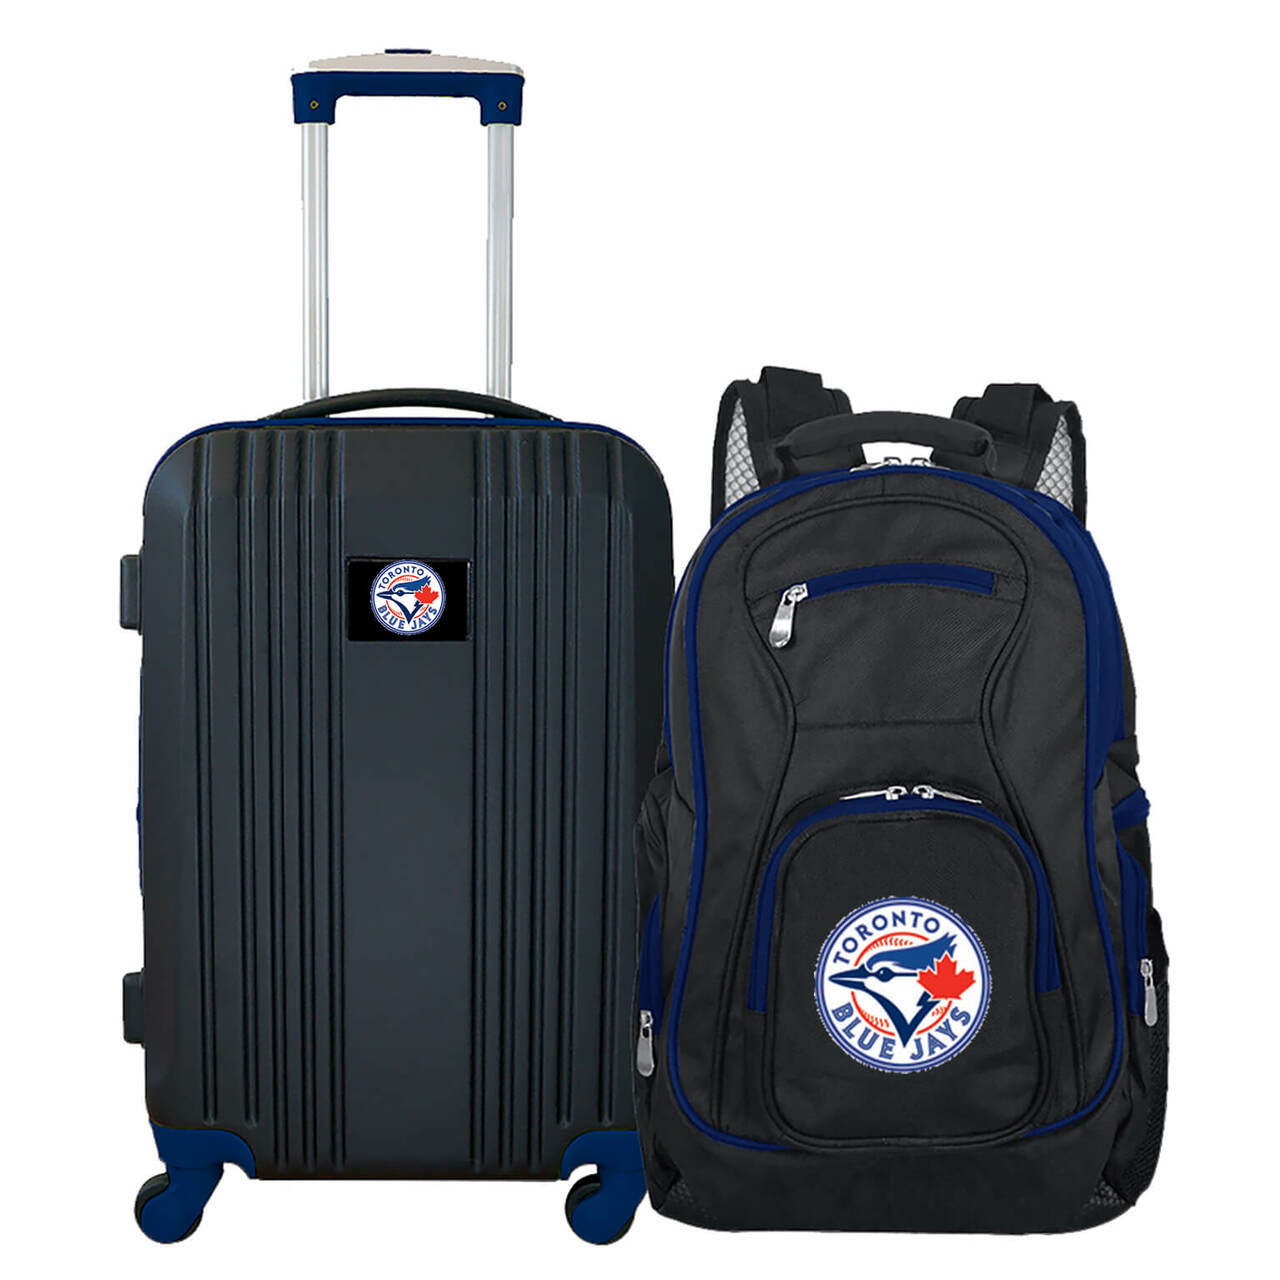 Toronto Blue Jays 2 Piece Premium Colored Trim Backpack and Luggage Set